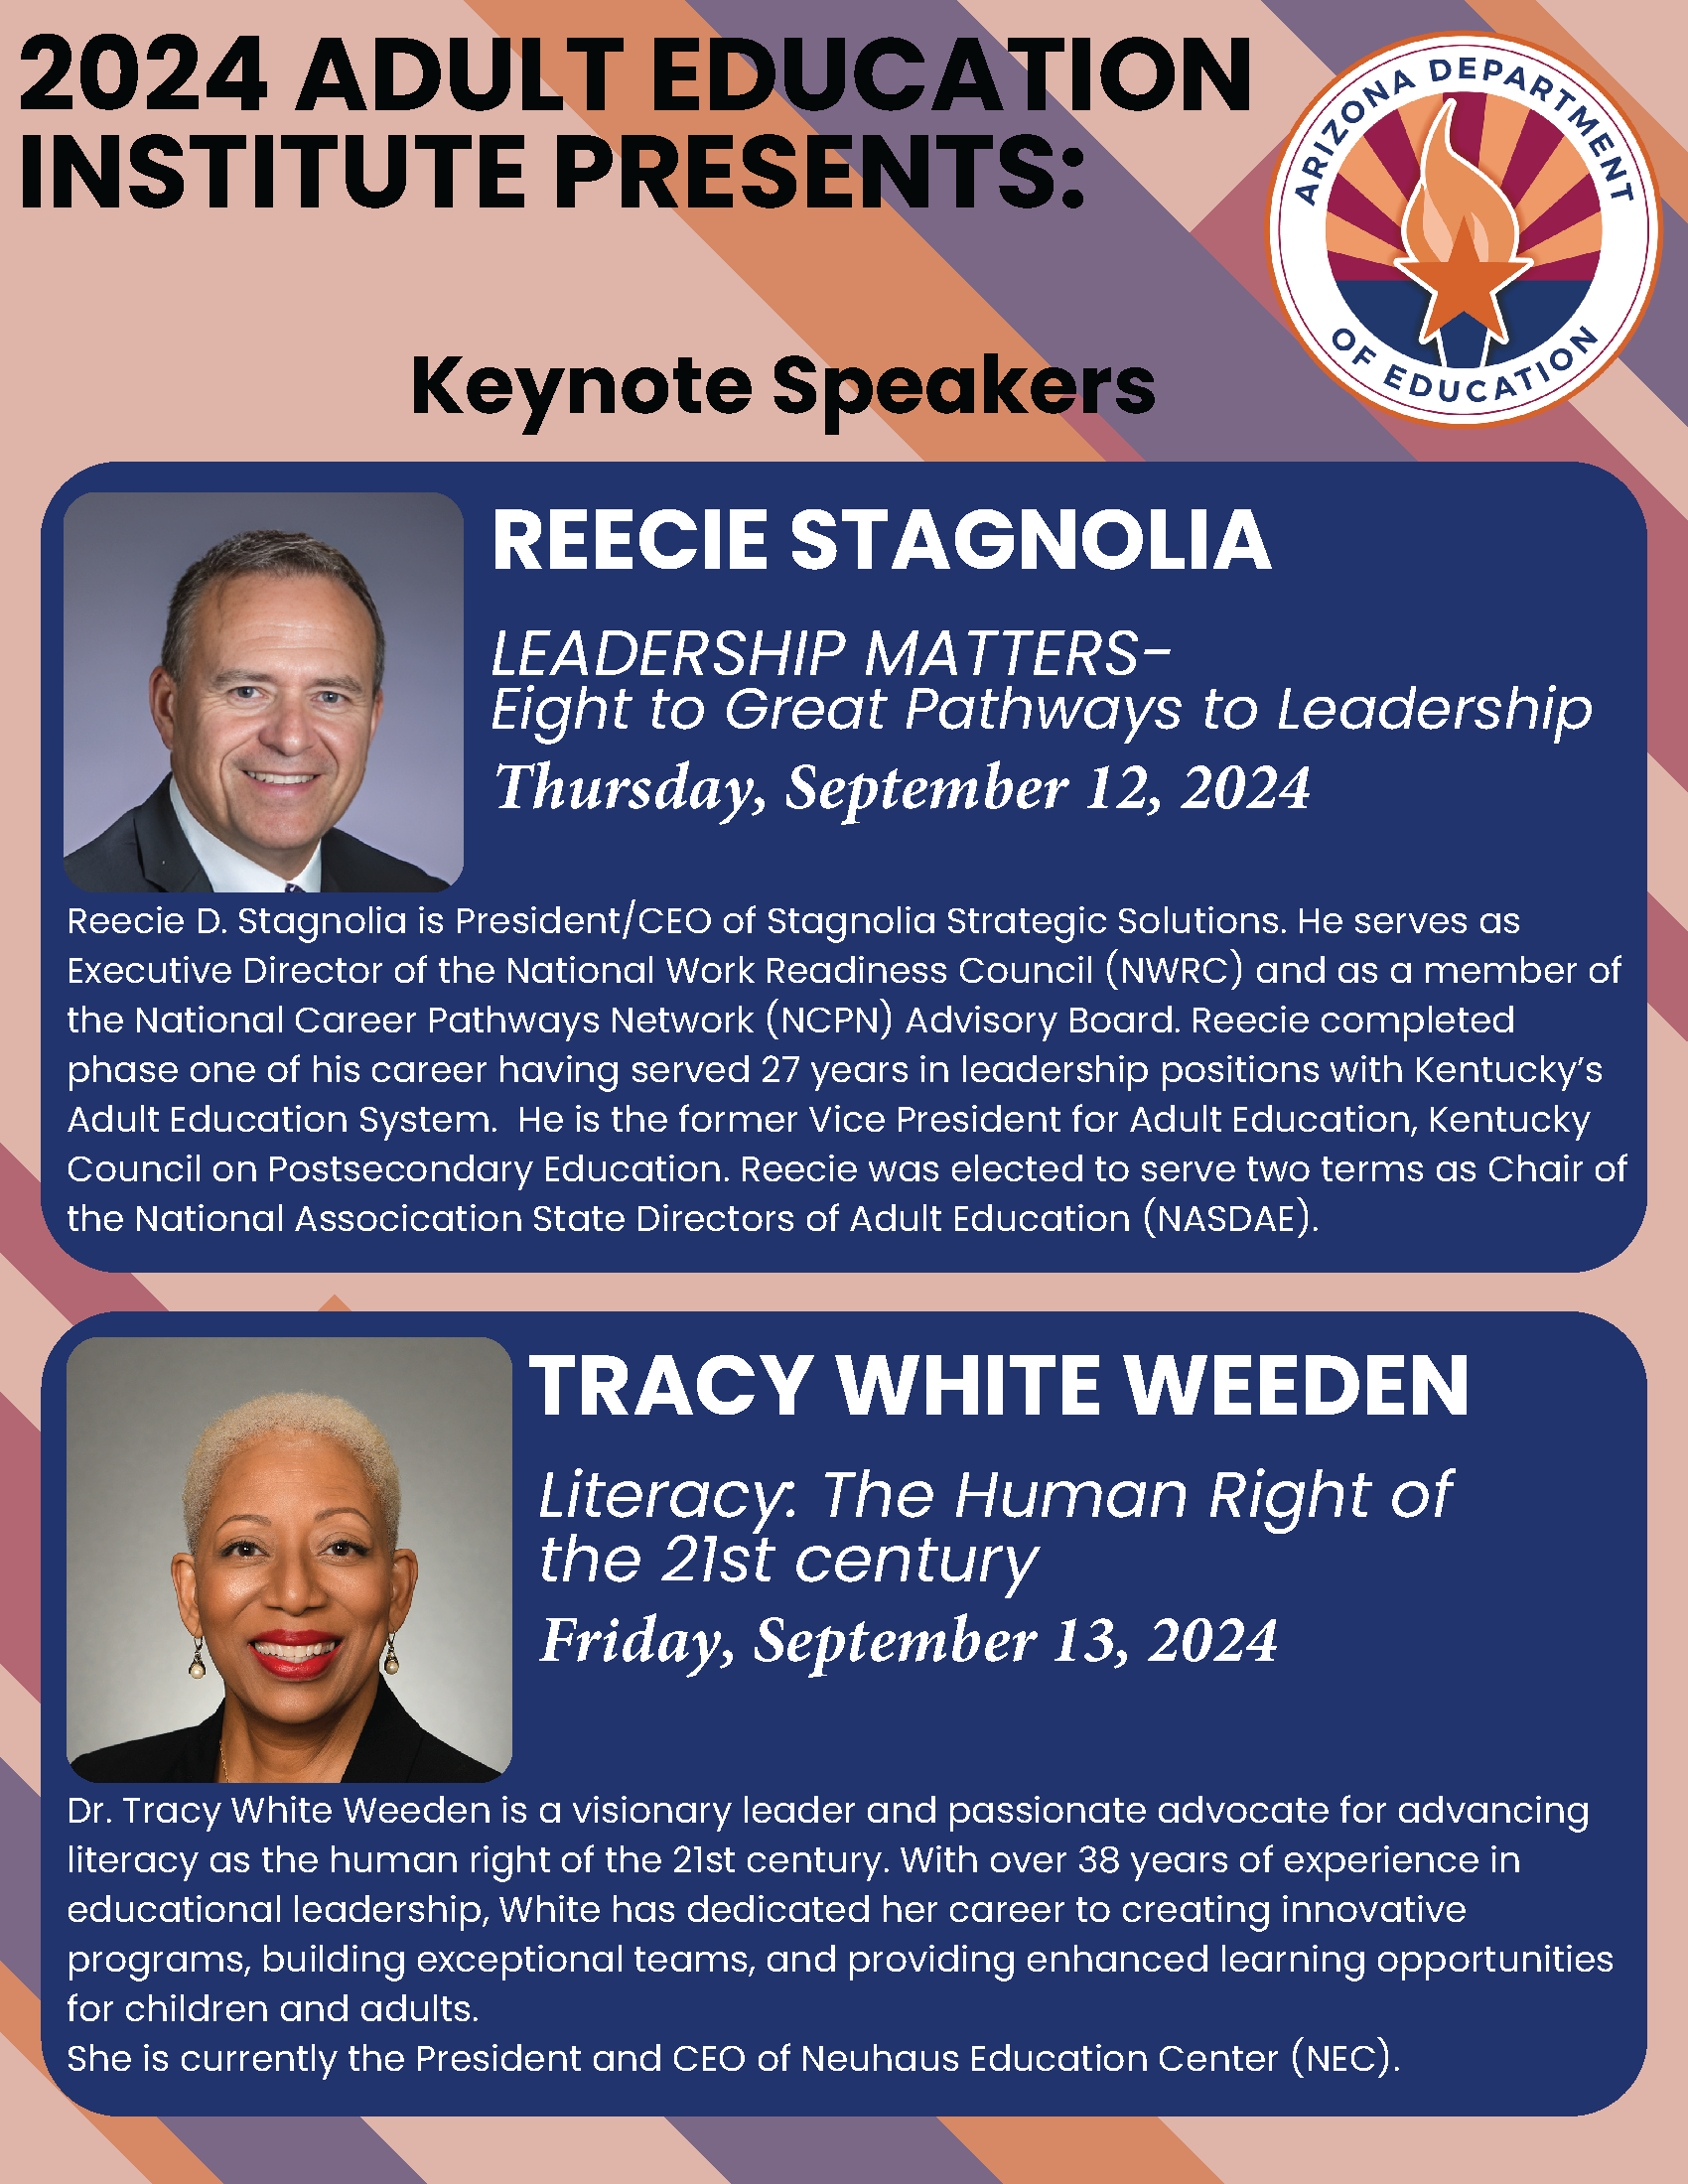 2024 Arizona Adult Education Institute Keynote Speakers are Reecie Stagnolia and Tracy White Weeden. Reecie D. Stagnolia is President & CEO of Stagnolia Strategic Solutions. He serves as Executive Director of the National Work Readiness Council (NWRC) and as a member of the on the National Career Pathways Network (NCPN) Advisory Board. With over 38 years of experience in educational leadership, Dr. Tracy White Weeden, President & CEO of Neuhaus Education Center, has dedicated her career to creating innovative programs, building exceptional teams, and providing enhanced learning opportunities for children and adults.